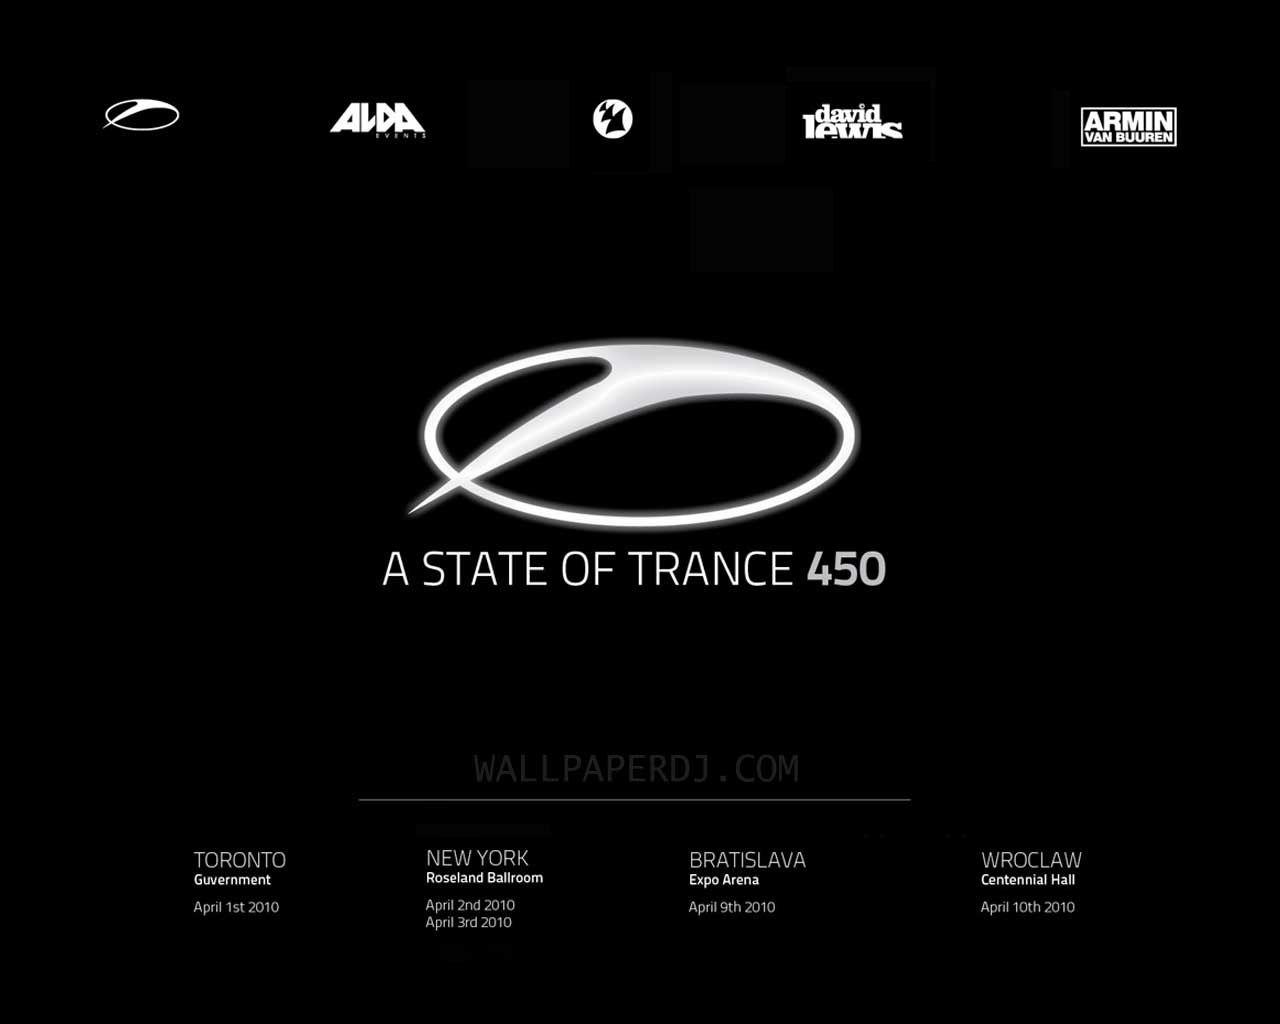 A State Of Trance 450 wallpaper, music and dance wallpaper